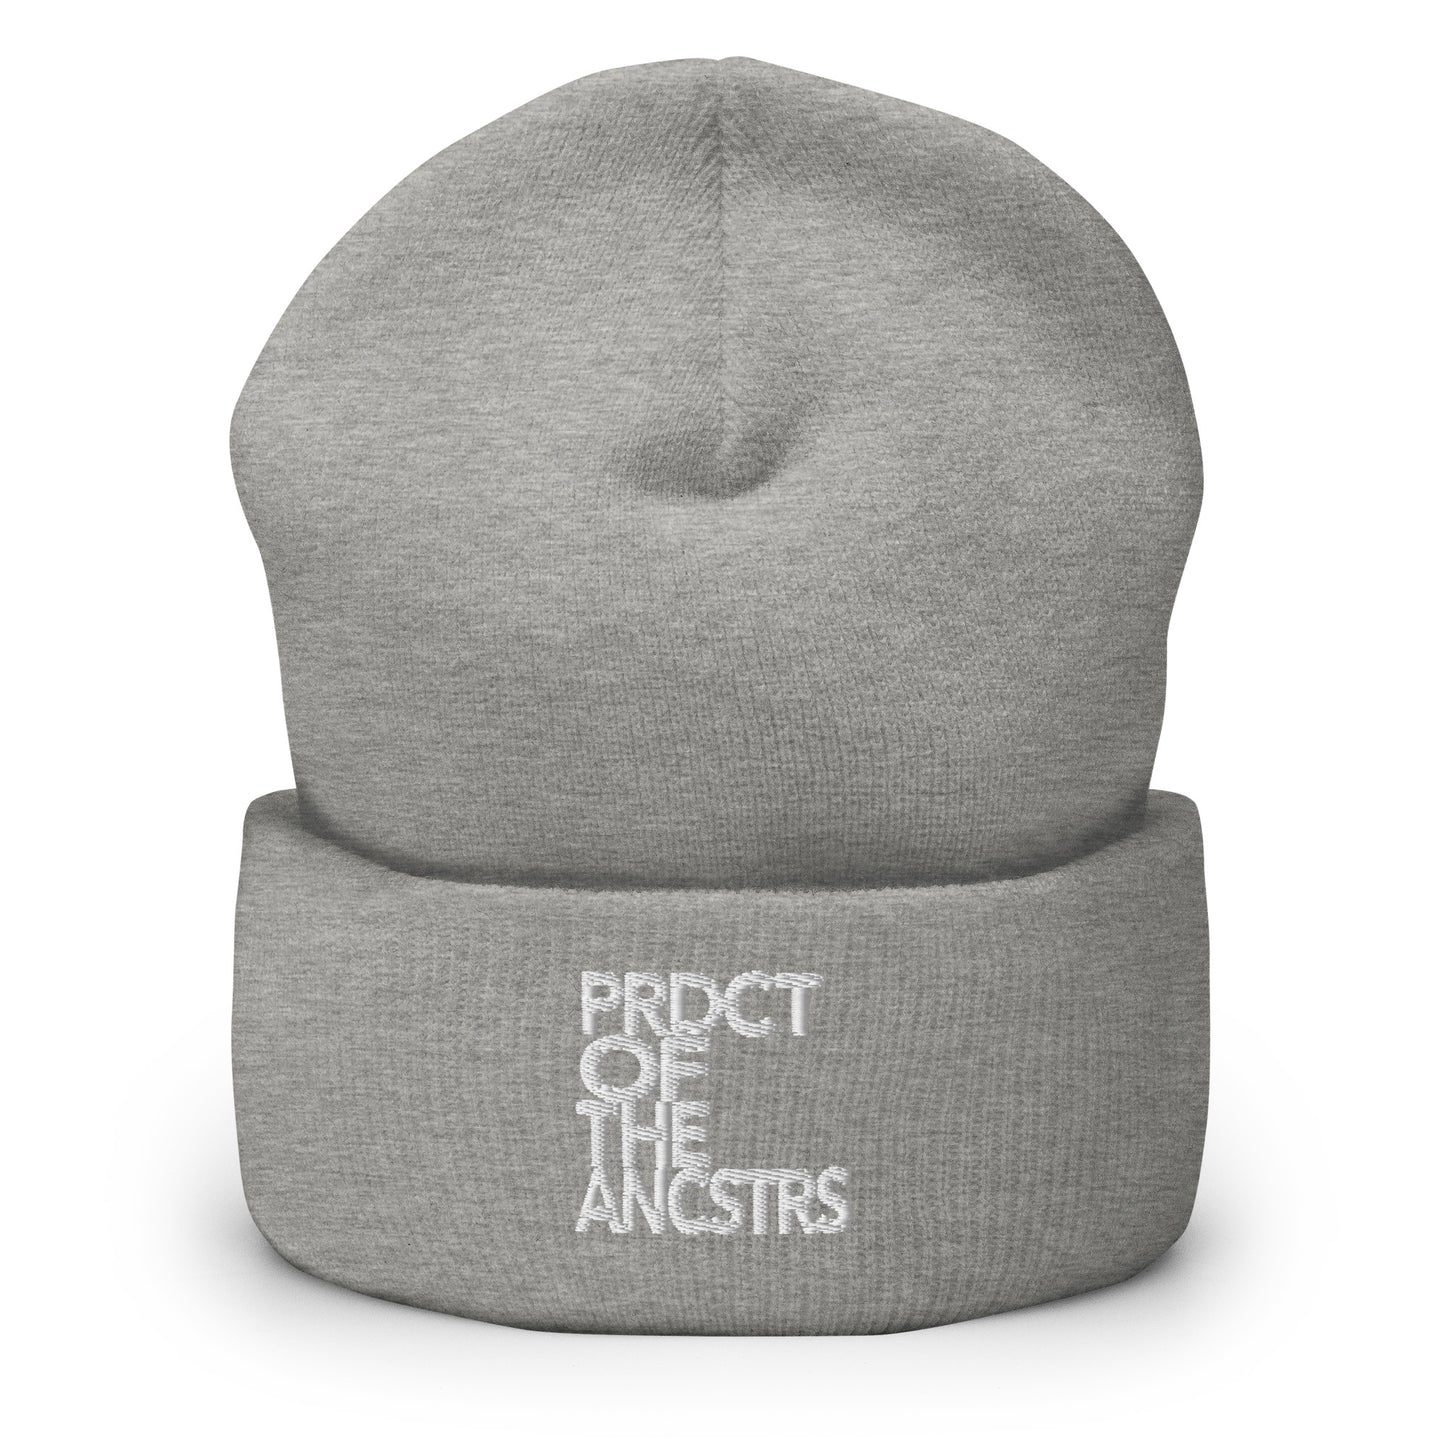 "Product of the Ancestors" Beanie